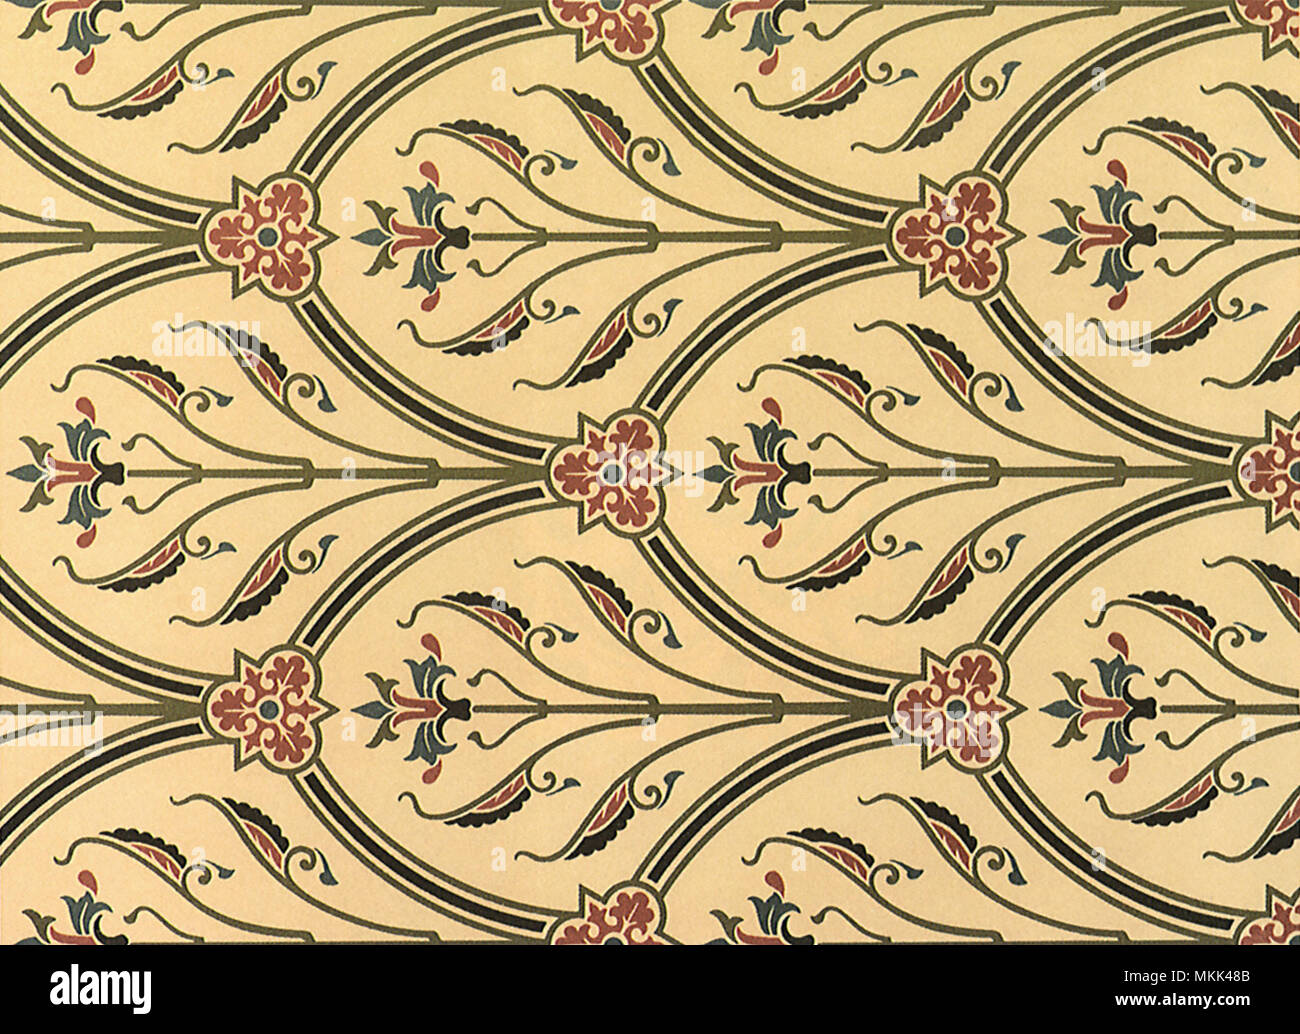 Medieval Floral Pattern Stock Photo